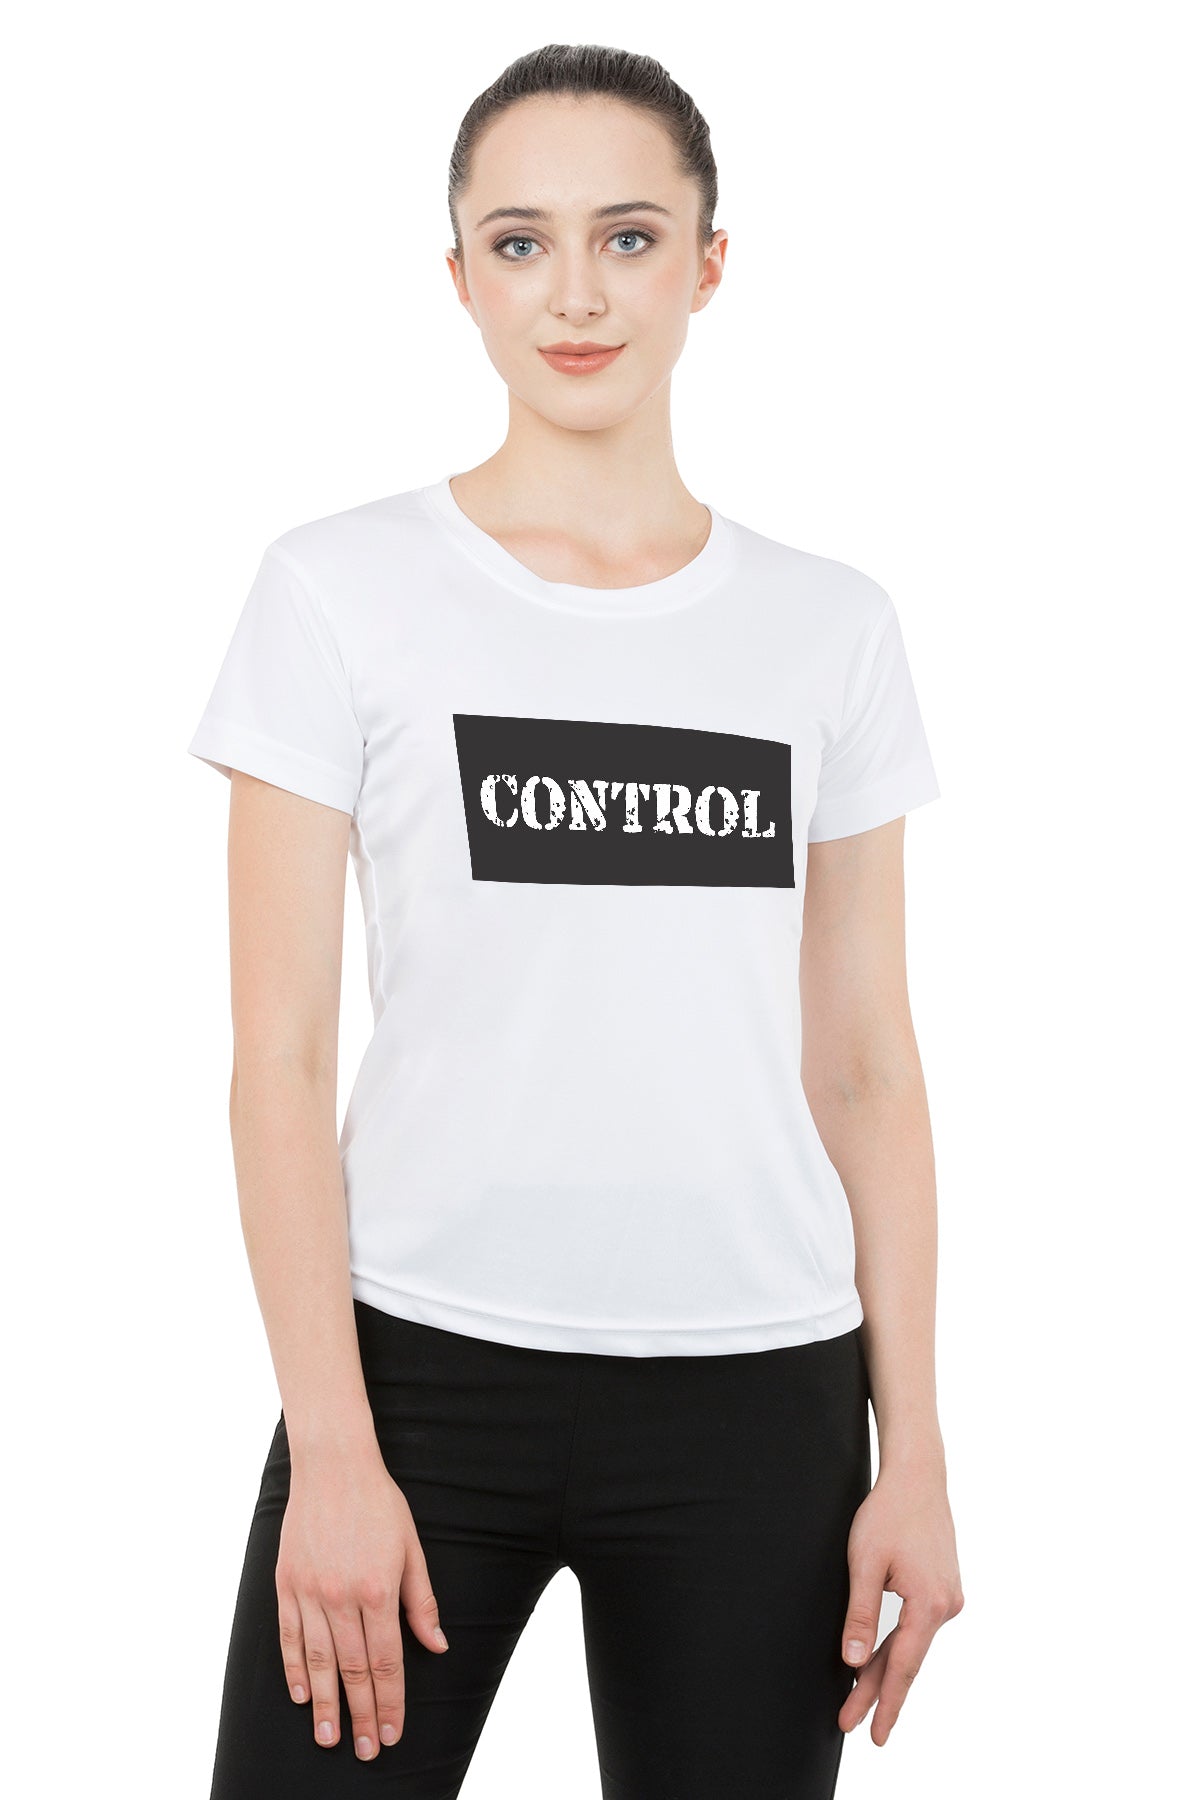 Remote Control matching Couple T shirts- White